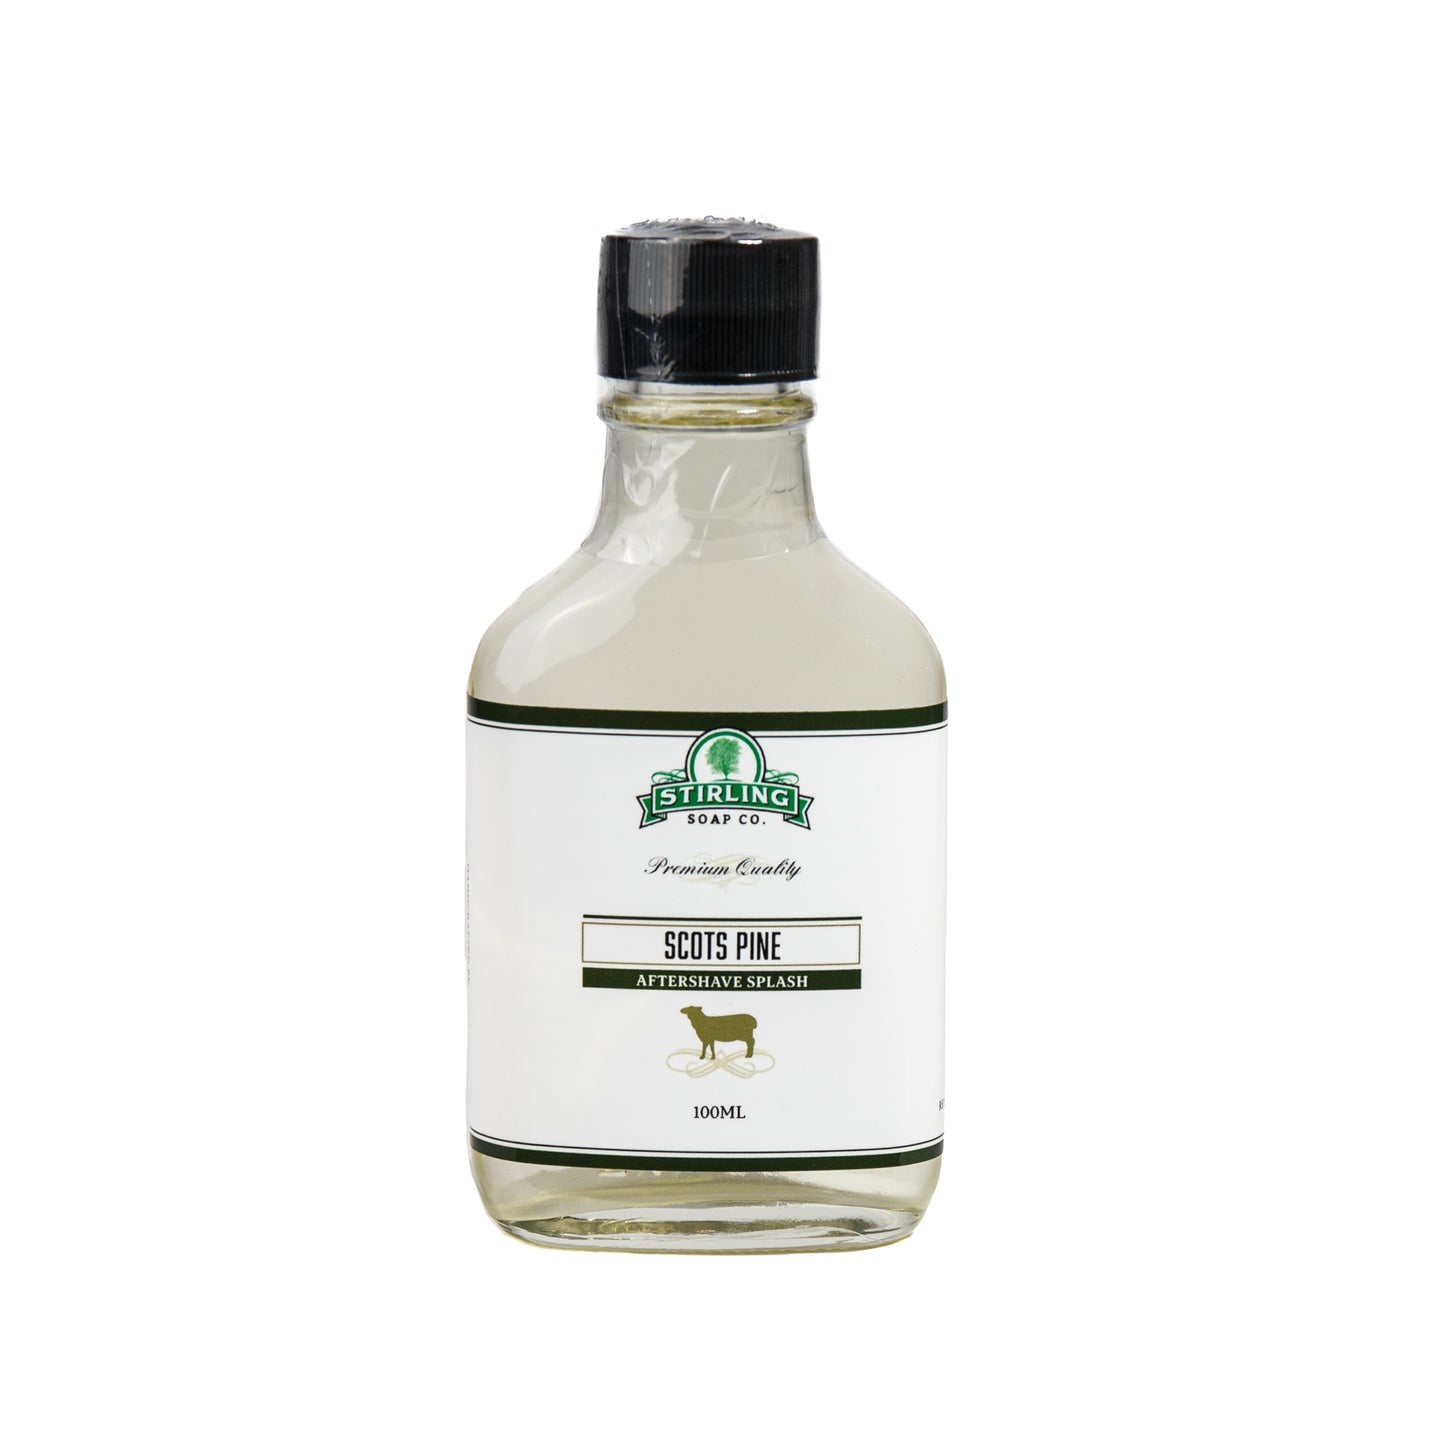 Primary Image of Scots Pine Aftershave Splash